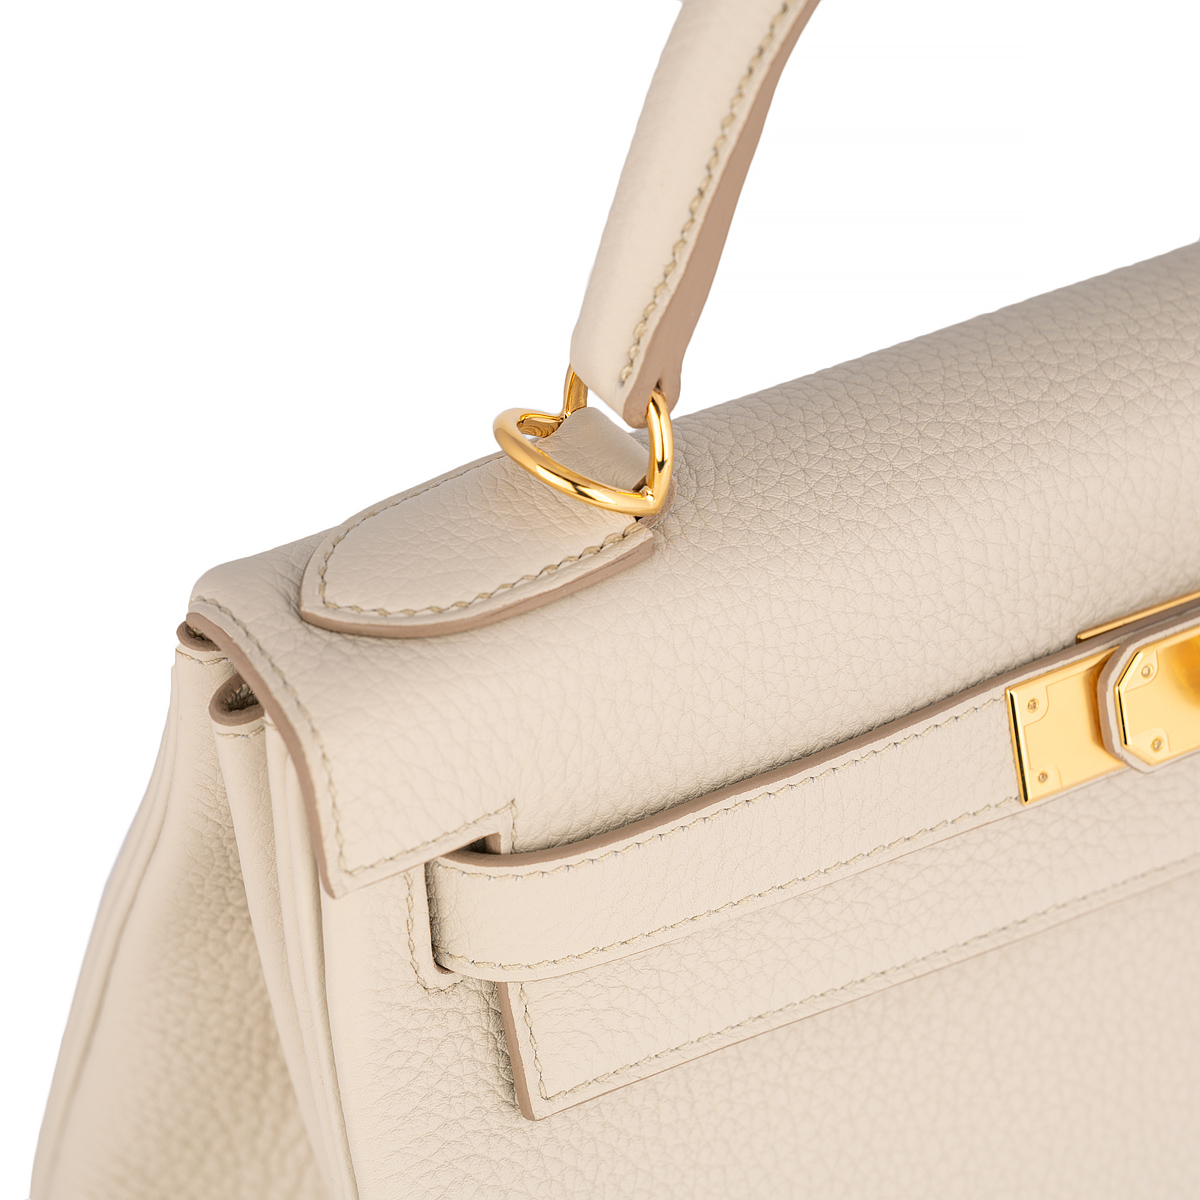 Hermes Kelly 28 Retourne Bag White Clemence Leather with Gold Hardware